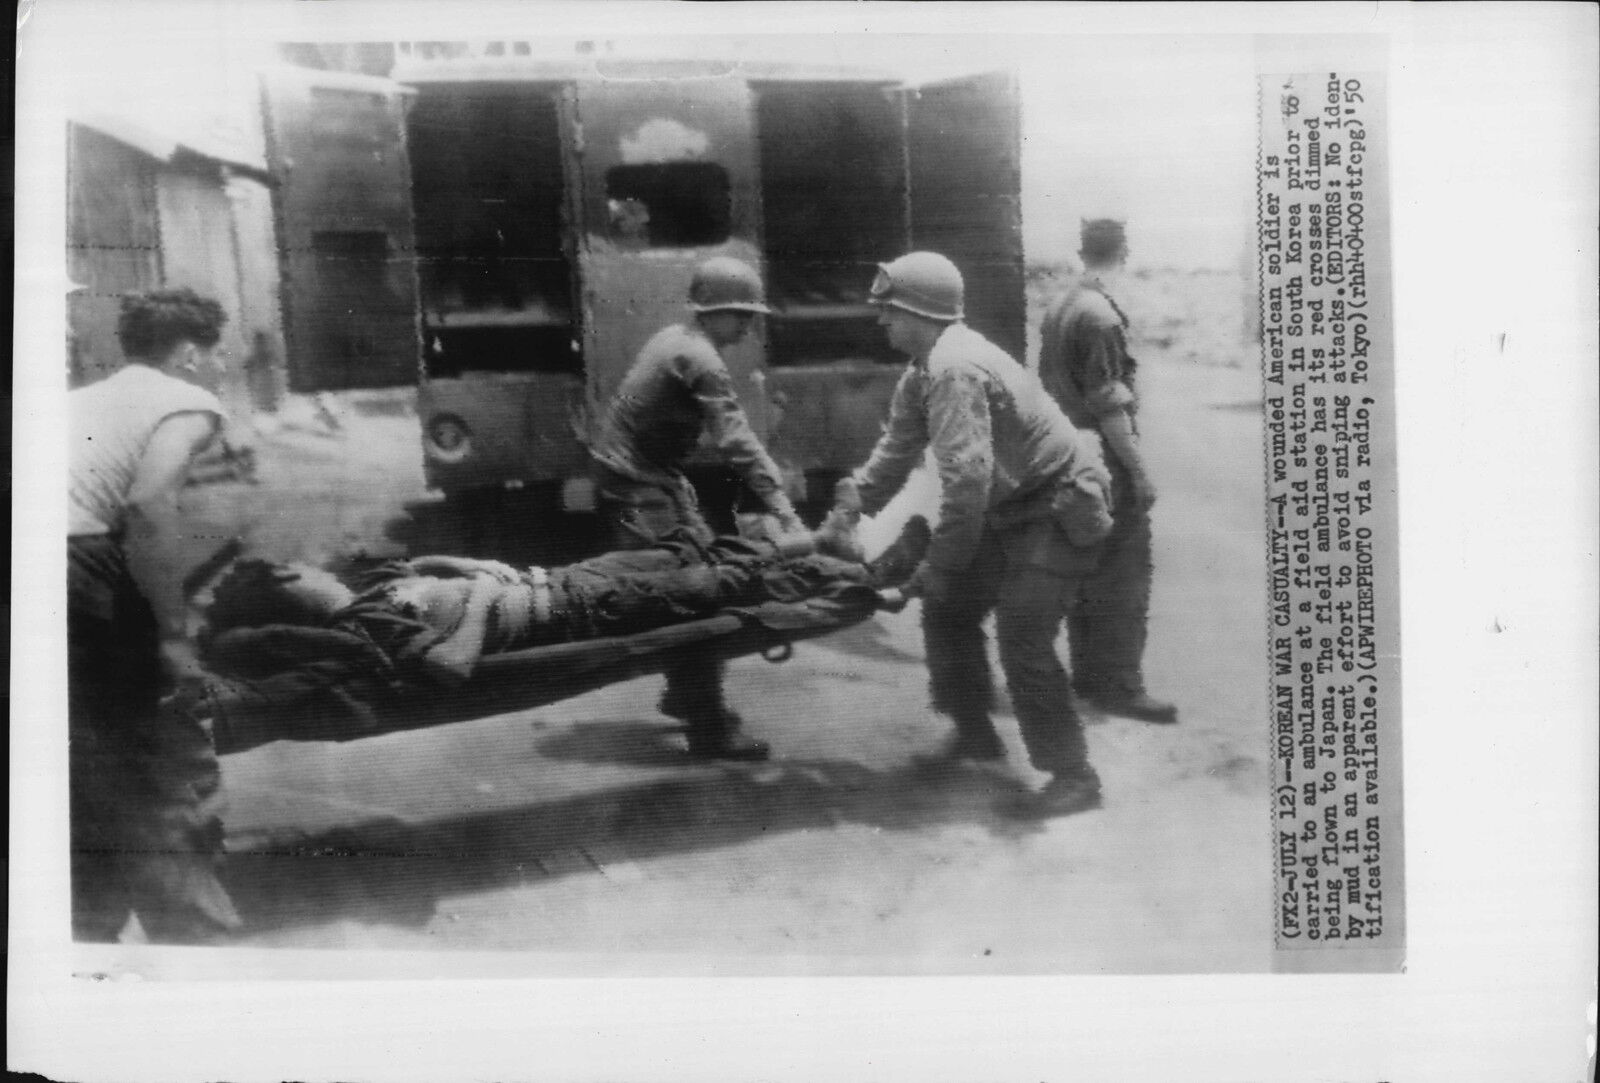 Wounded Carried By Field Ambulance From Aid Station 1950 Korea War Press Photo Poster painting